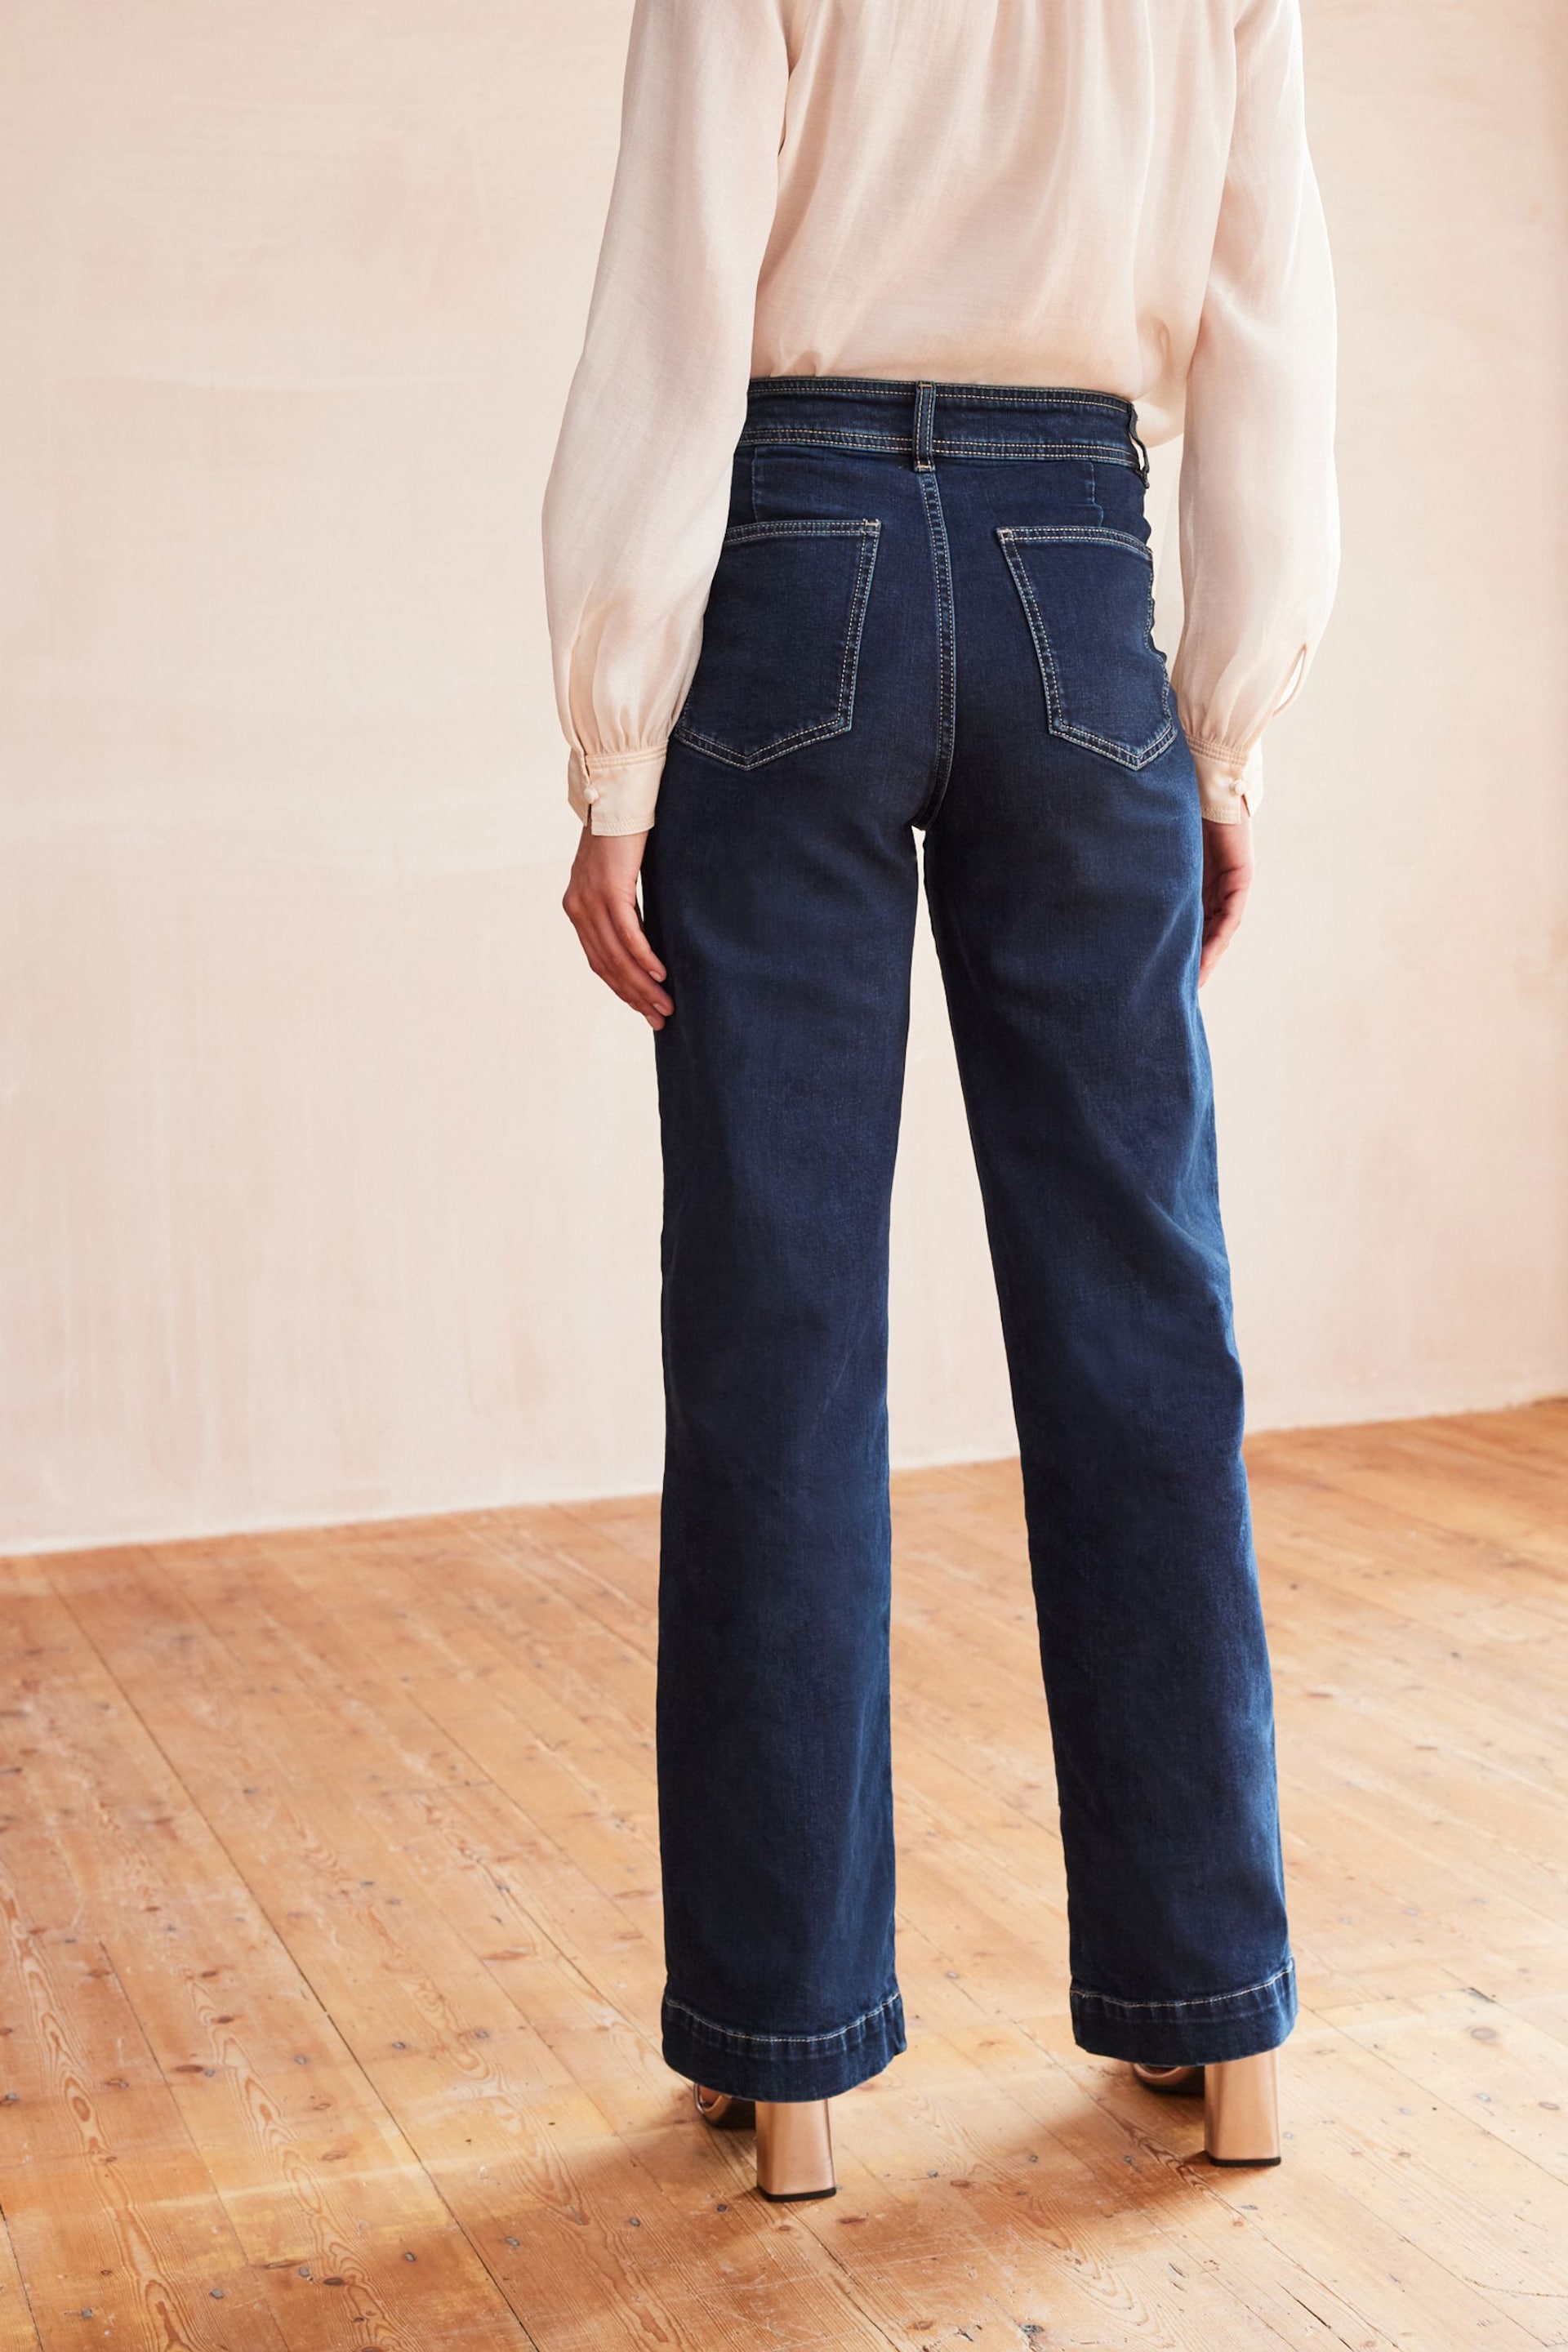 Denim Inky Blue Double Button Wide Leg Jeans - Image 3 of 6